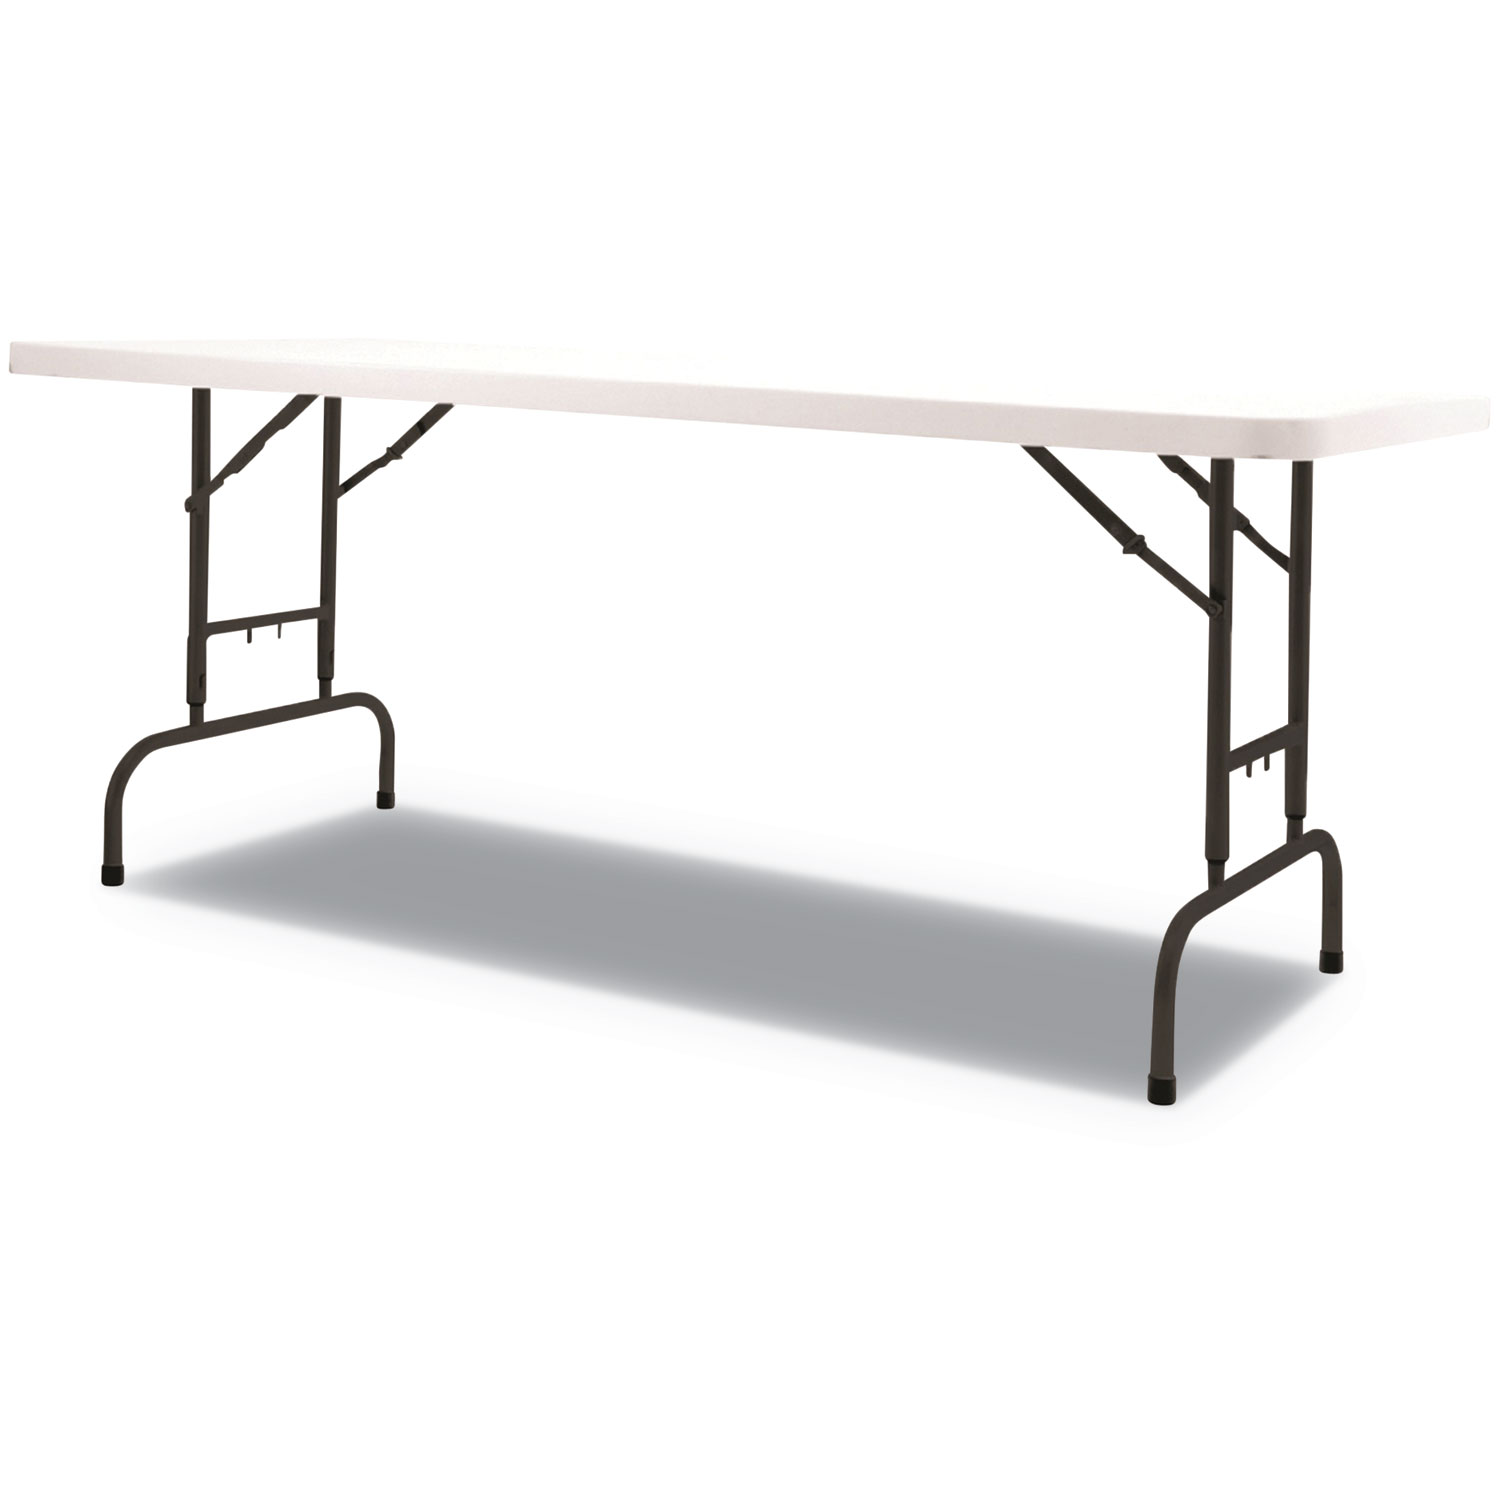  Alera ALEPT72AHW Adjustable Height Plastic Folding Table, 72w x 29 5/8d x 29 1/4 to 37 1/8h, White (ALEPT72AHW) 